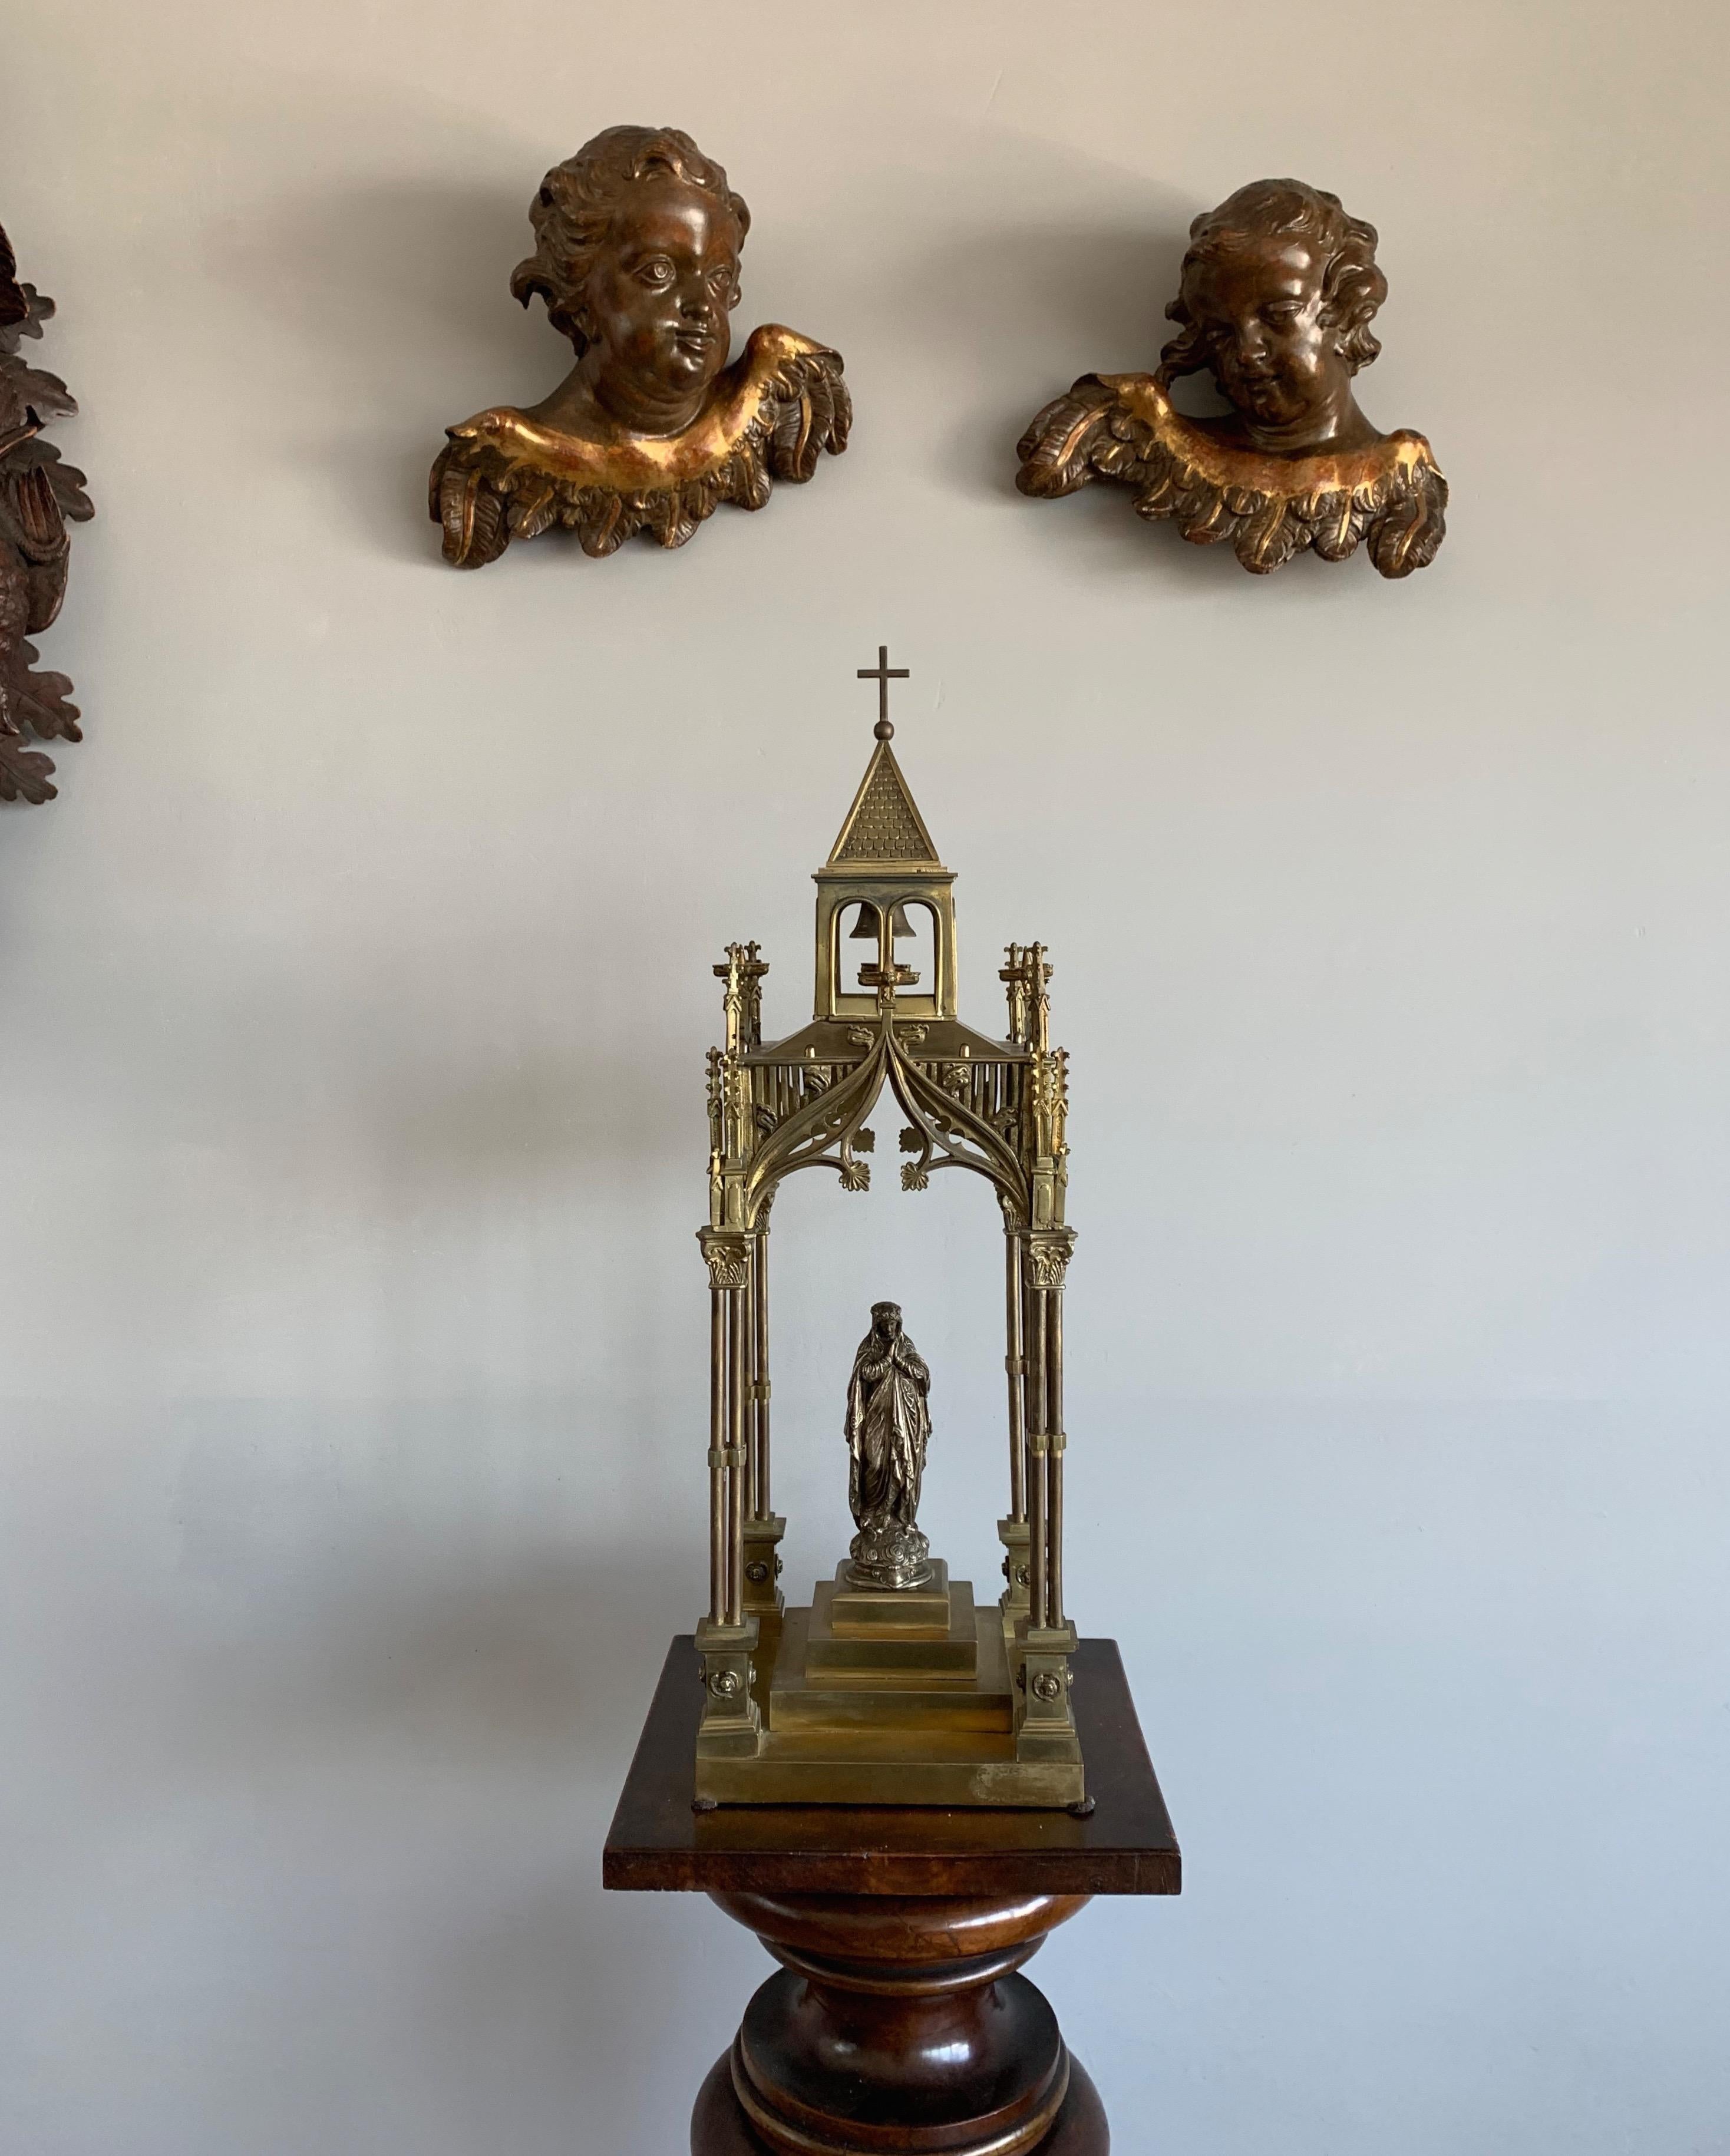 Baroque style, hand carved and hand gilt angel sculptures.

If you are looking for decorative and meaningful wall-art to grace your living space then these hand carved and hand painted antique wall putti could be perfect. You may have seen pairs of